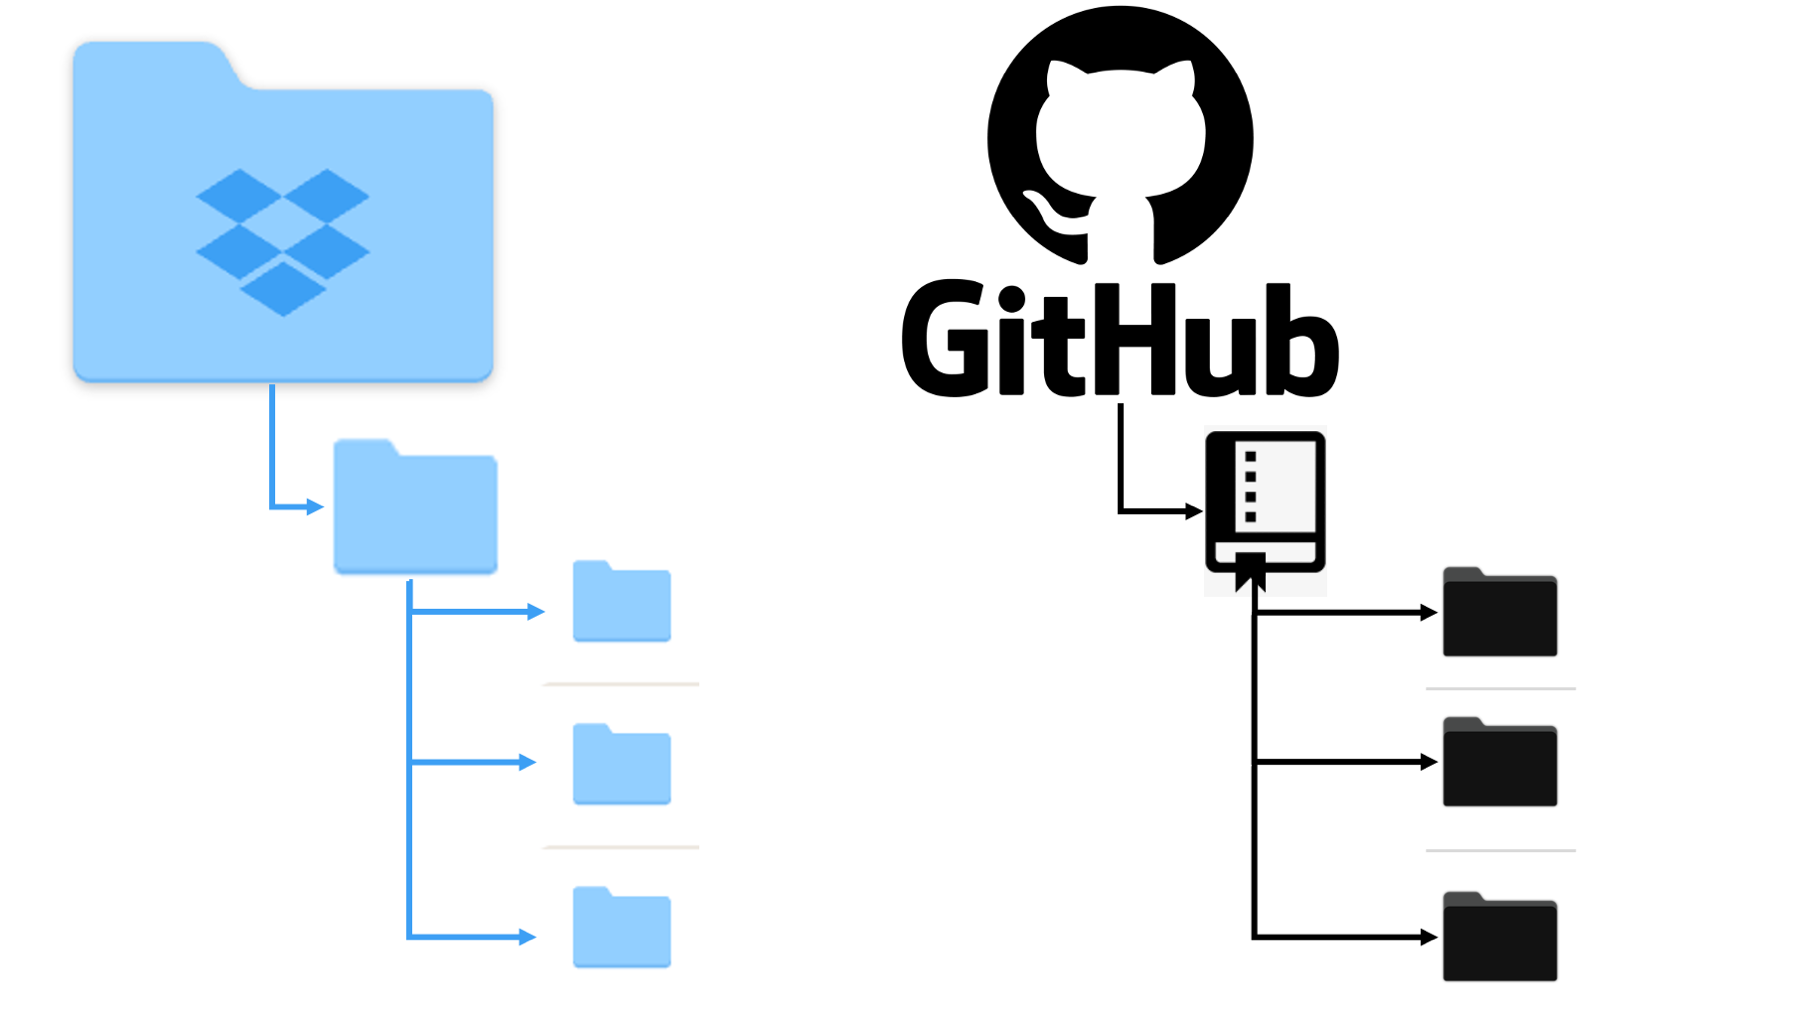 GitHub repositories compared to Dropbox.